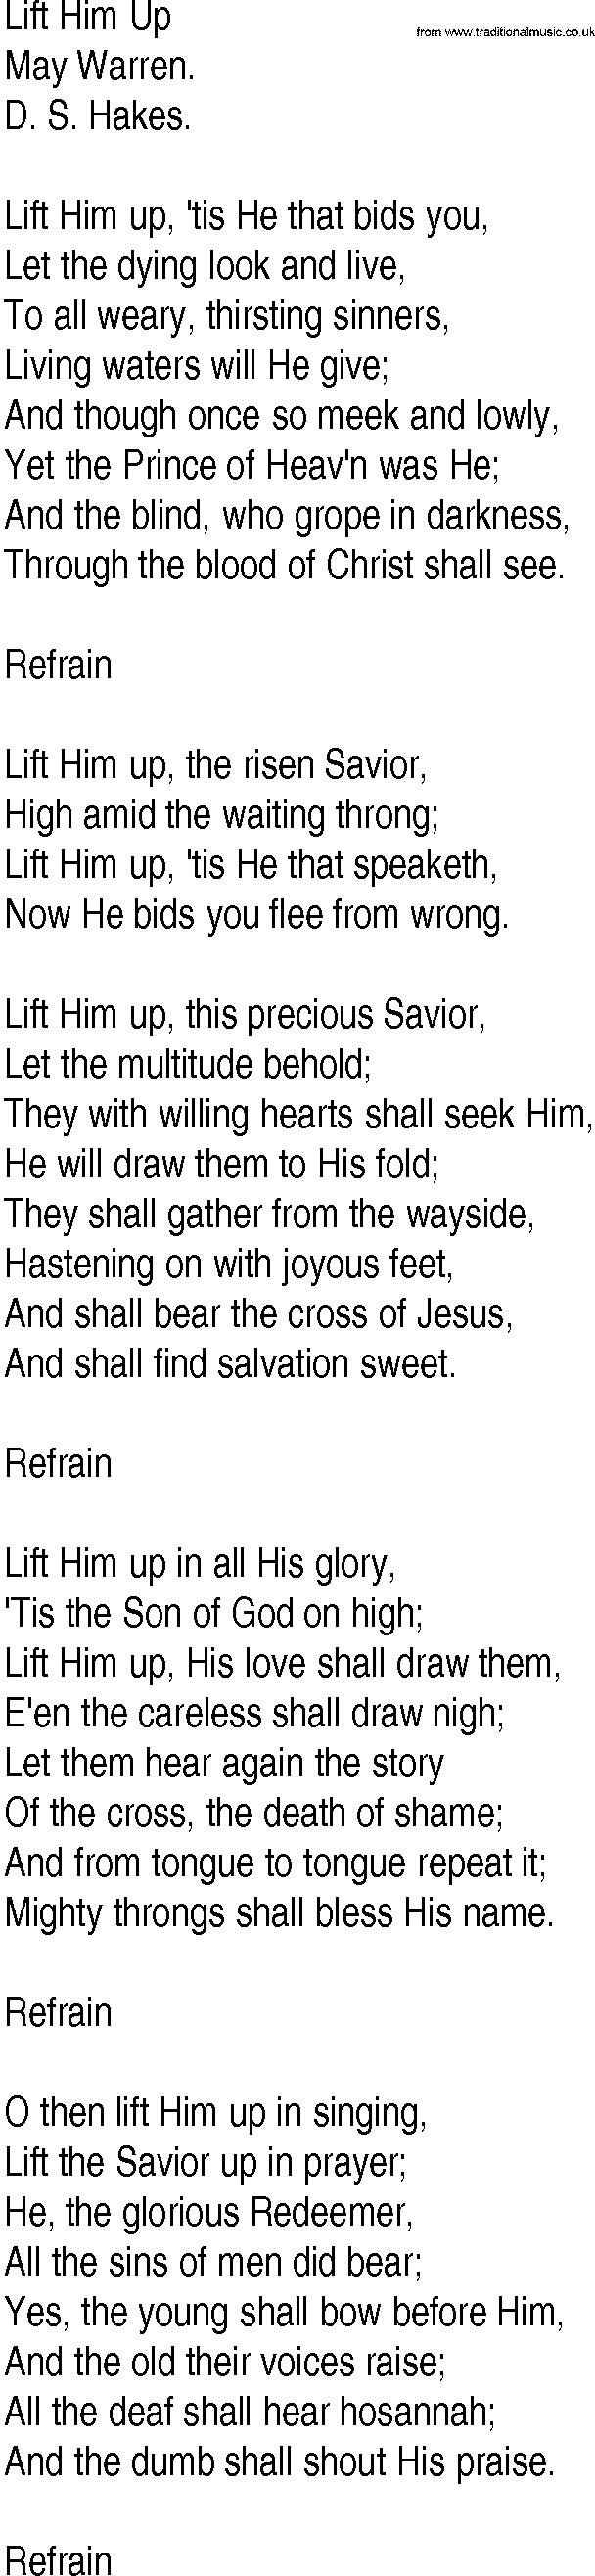 Hymn and Gospel Song: Lift Him Up by May Warren lyrics